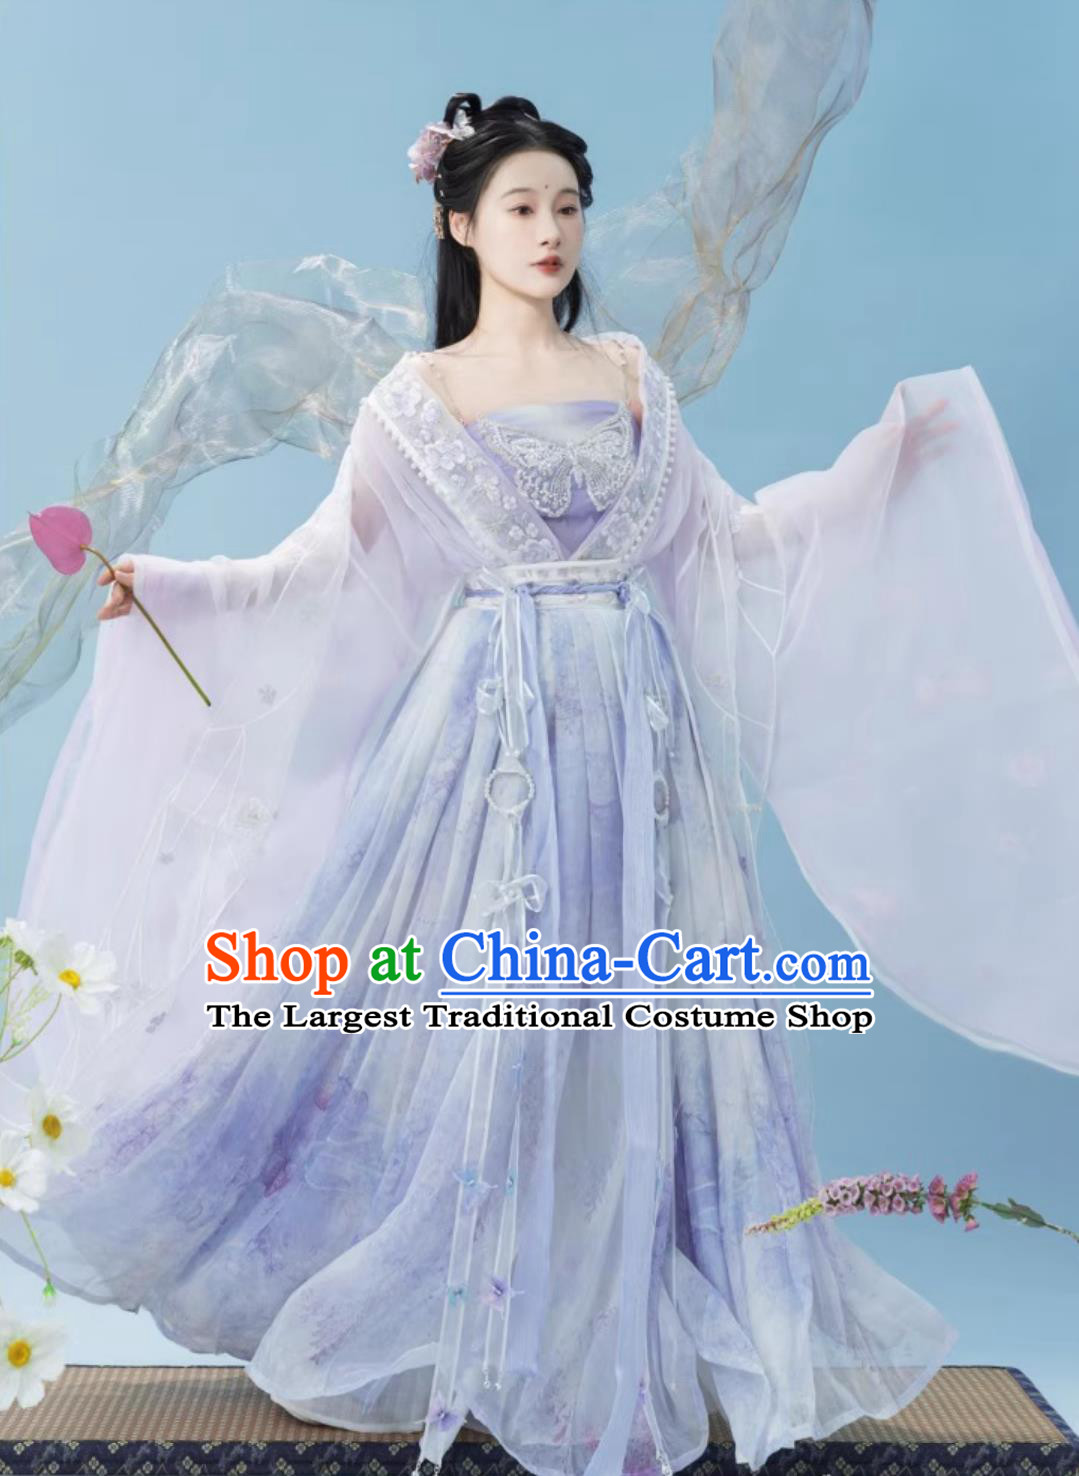 Chinese Wei Jin Southern and Northern Dynasties Palace Princess Costumes Traditional Ancient Goddess Lilac Dresses Hanfu Online Shop